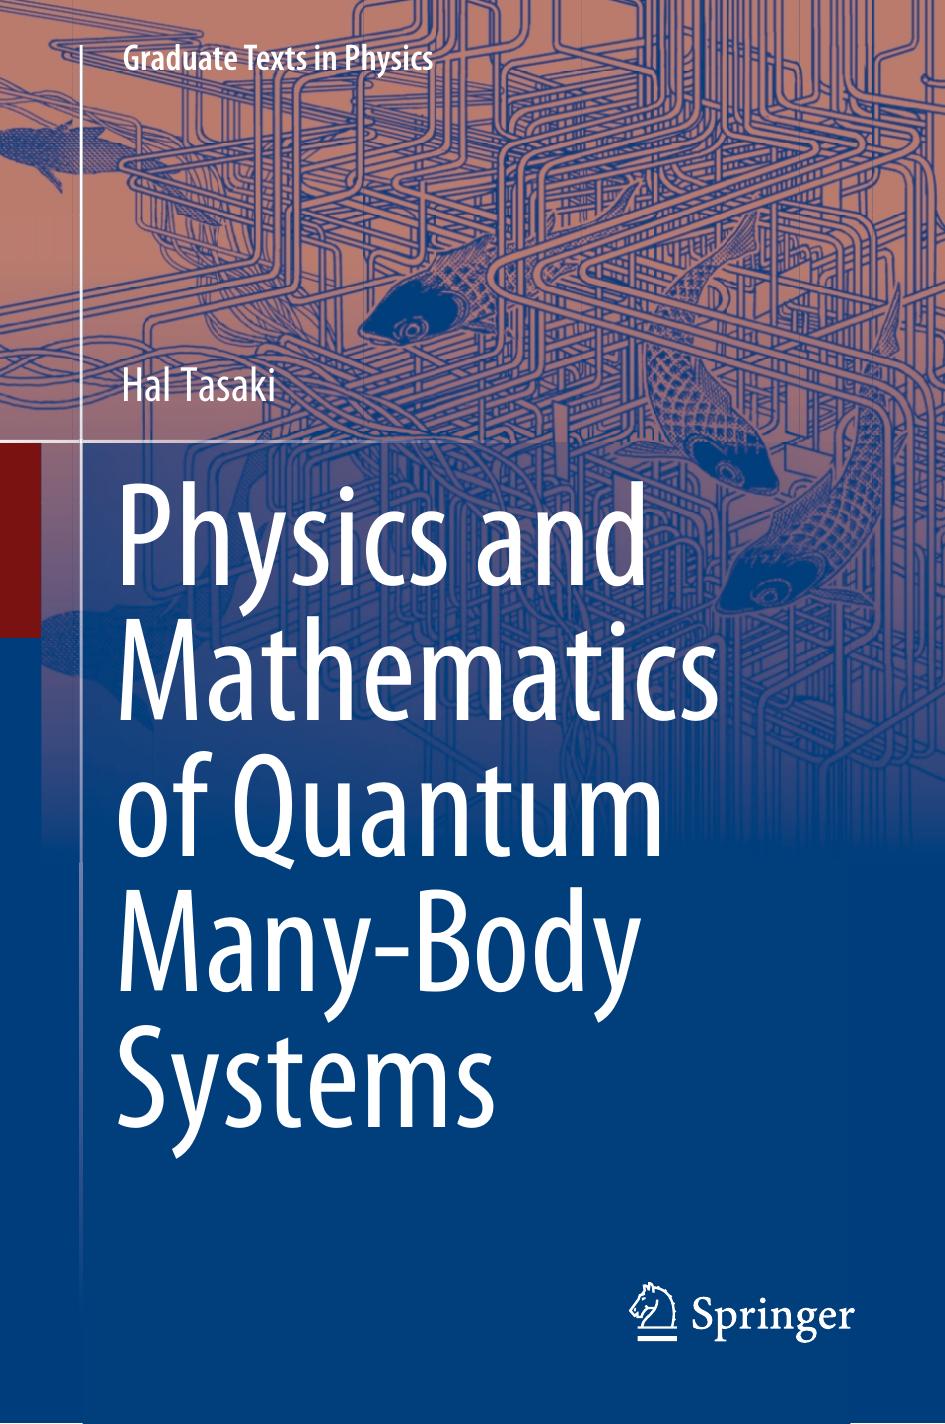 Physics and Mathematics of Quantum Many-Body Systems by Hal Tasaki